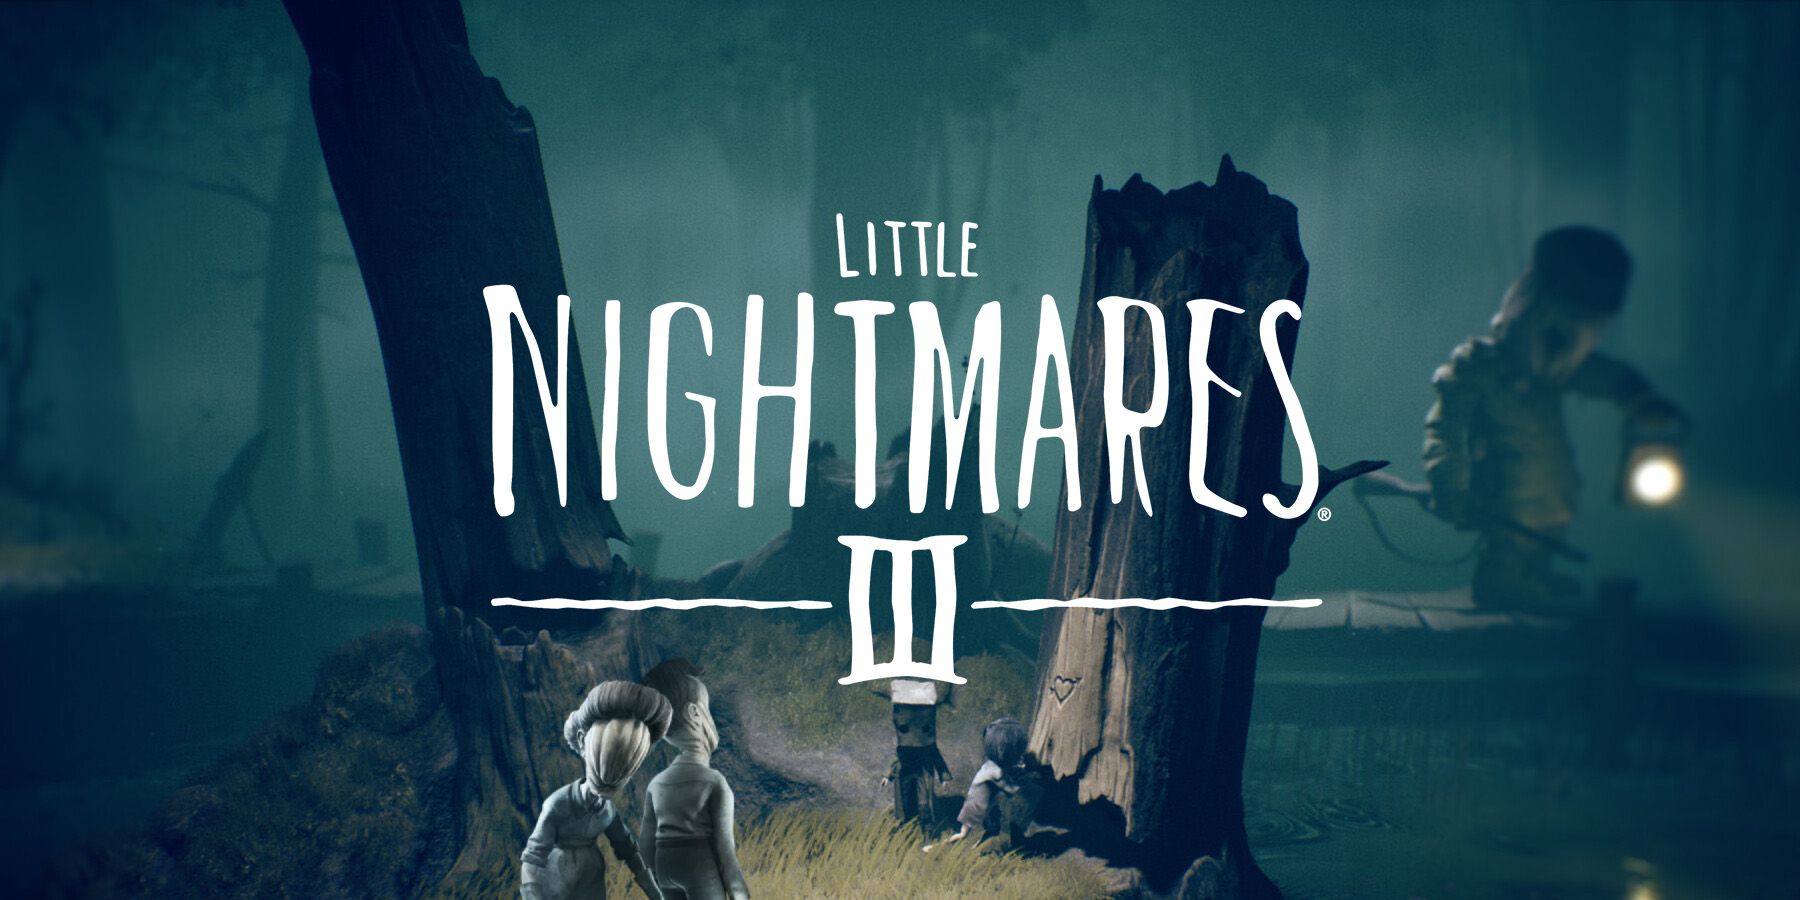 Bandai Namco Job Listings Appear To Confirm Little Nightmares 3 Gamerant 